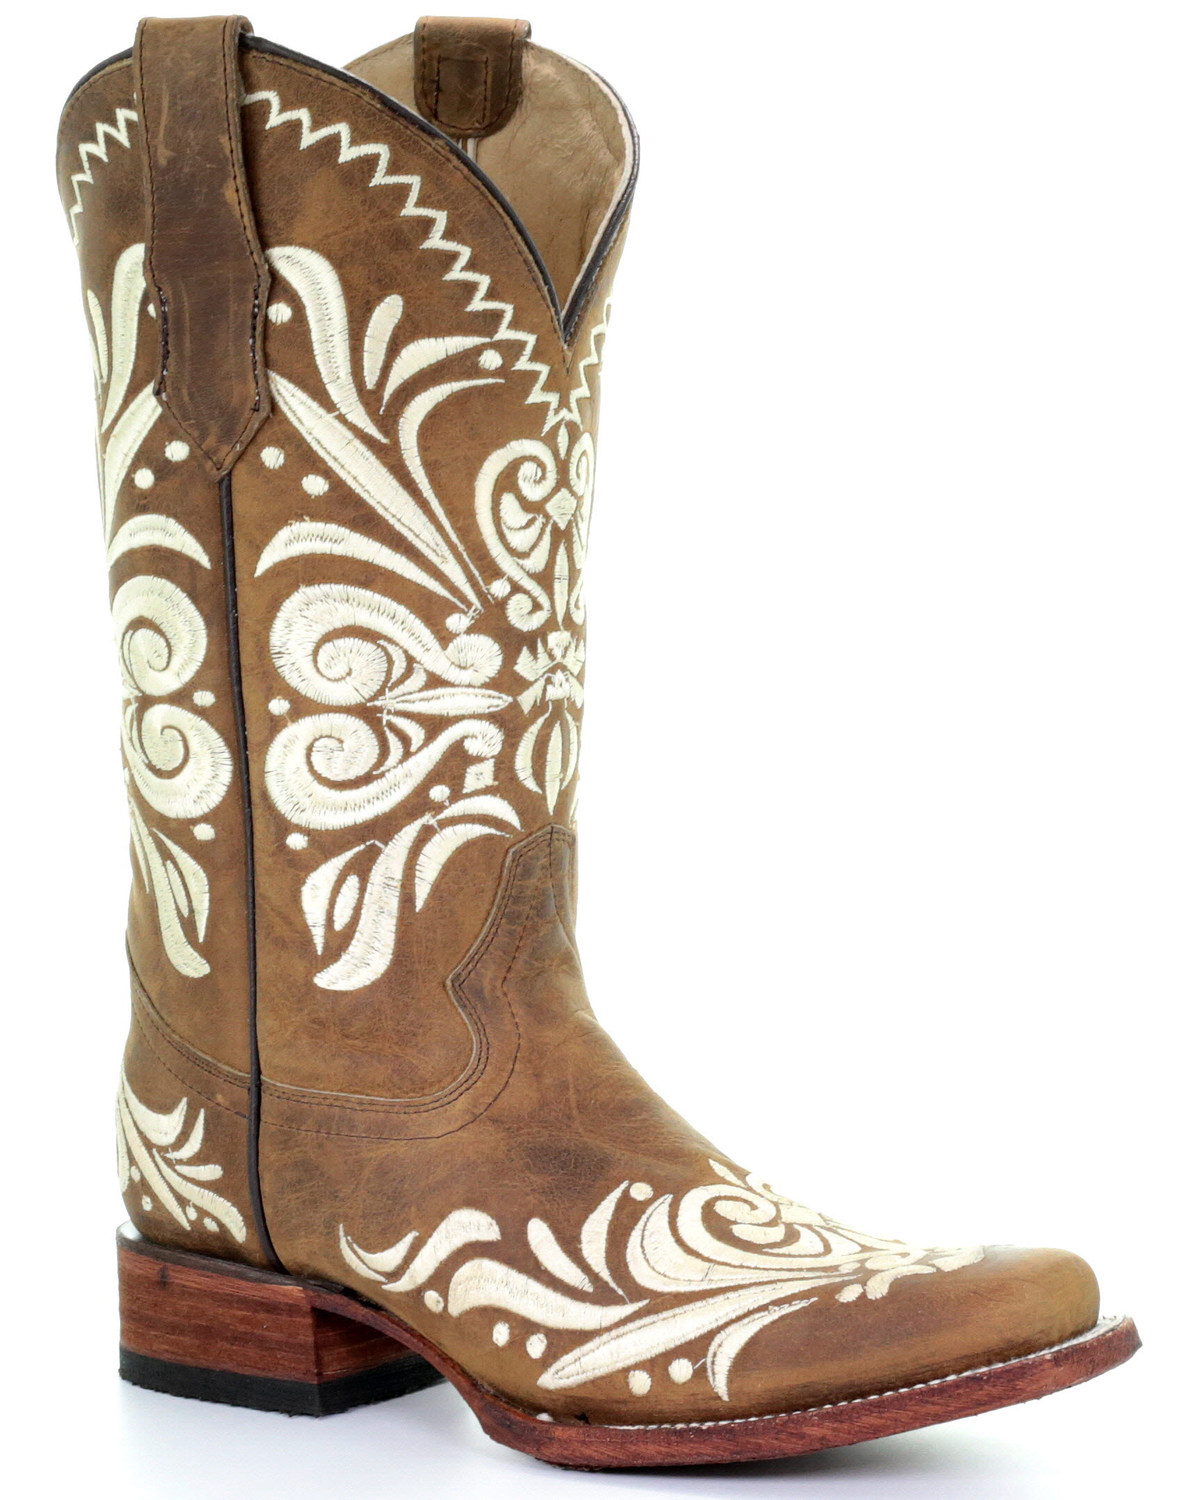 Circle G Women's Embroidery Western Boots - Square Toe